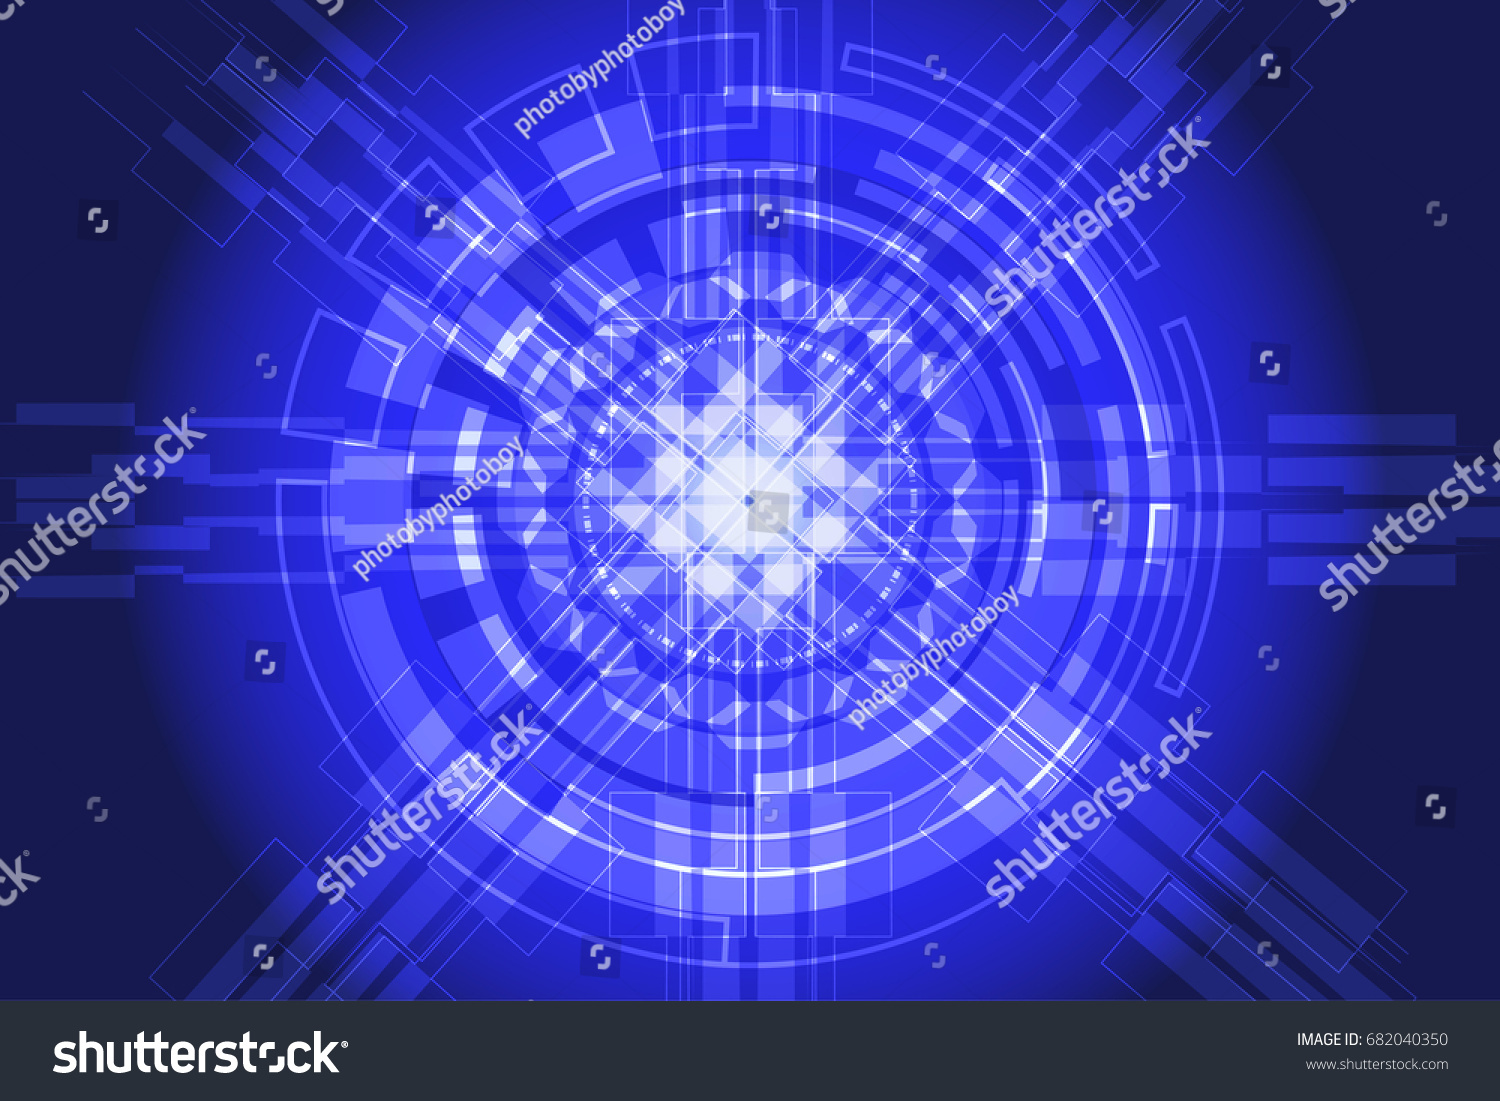 Abstract  technology innovation concept vector background : EPS 10 #682040350